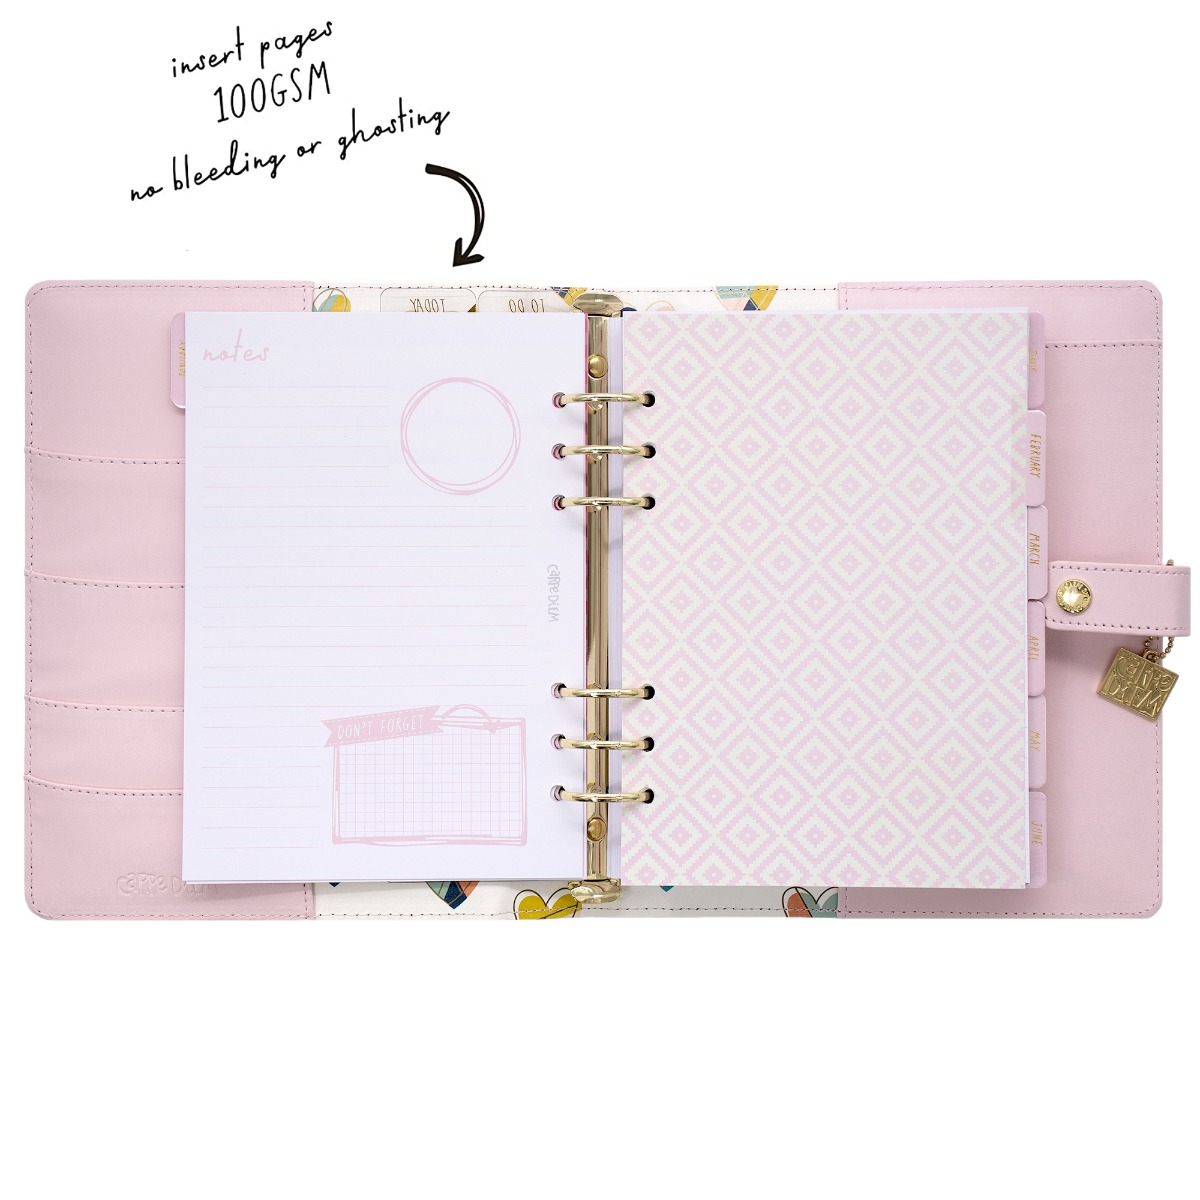 A5 Size Planner Recipe Inserts, A5 Size Meal Planning Inserts Fits with  Kate Spade A5, Louis Vuitton GM, Carpe Diem, Color Crush, Filofax (Planner